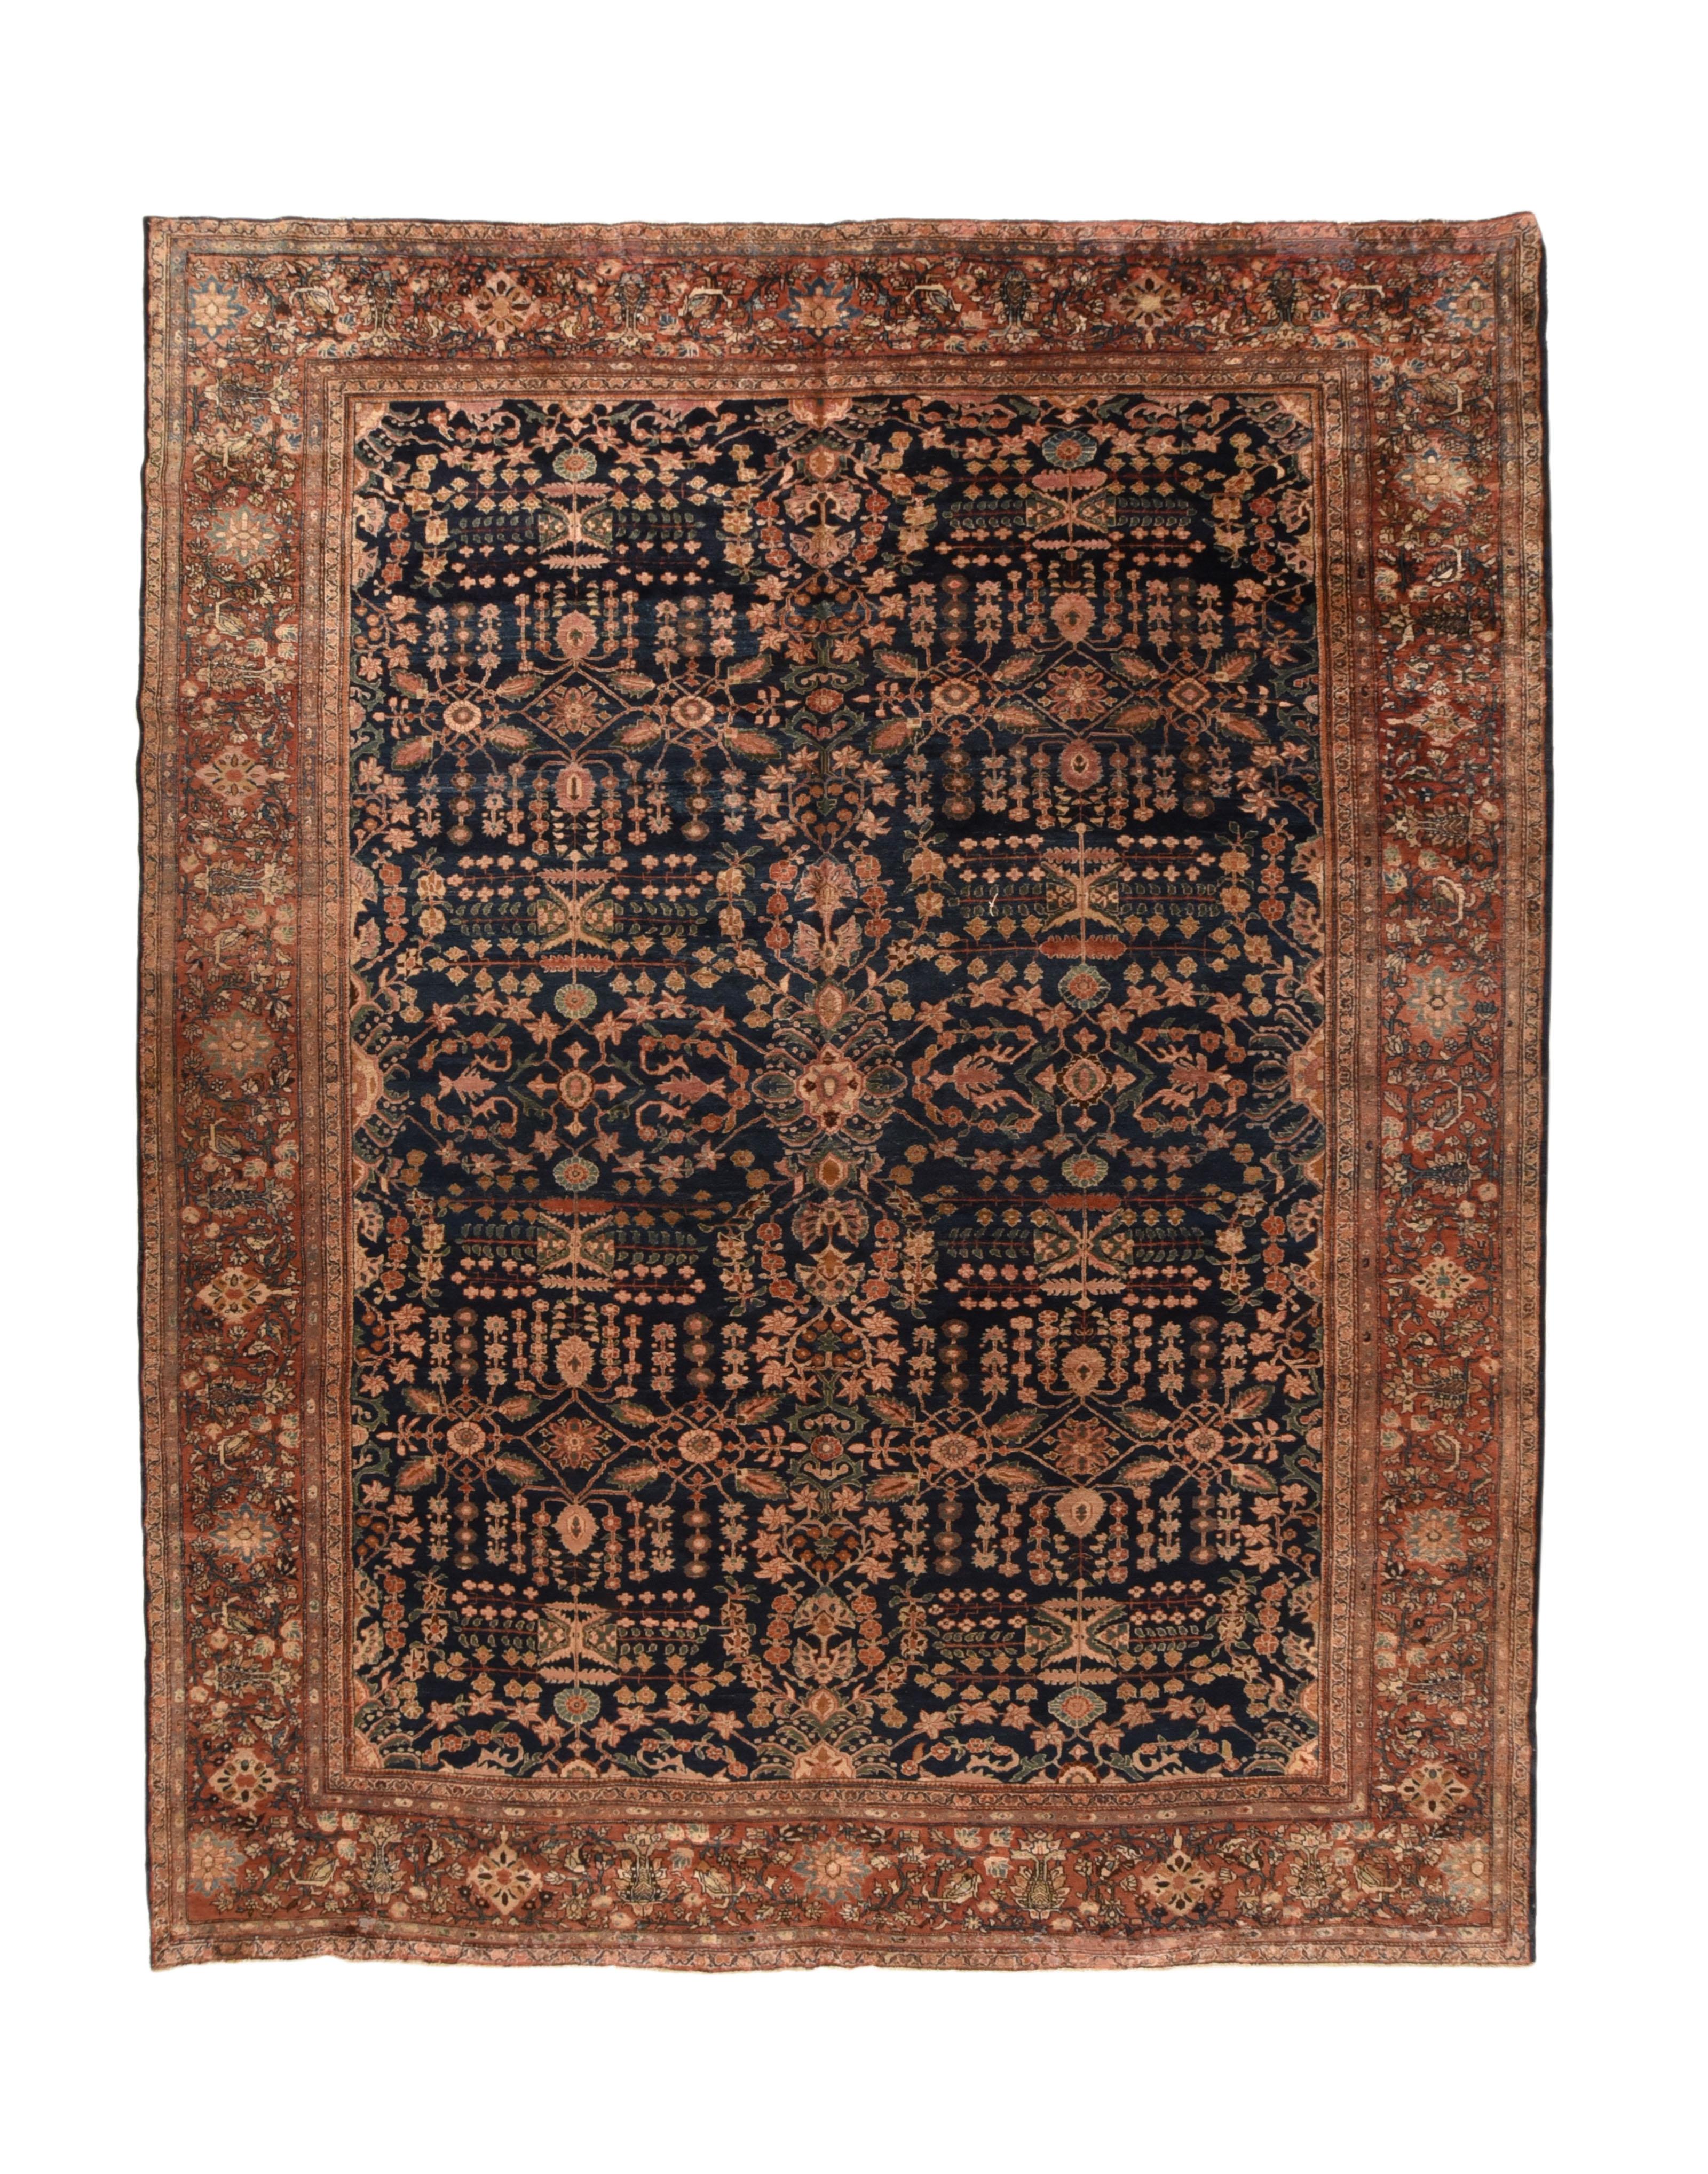 Antique Farahan Sarouk Rug 10'6'' x 13'9'' In Excellent Condition For Sale In New York, NY